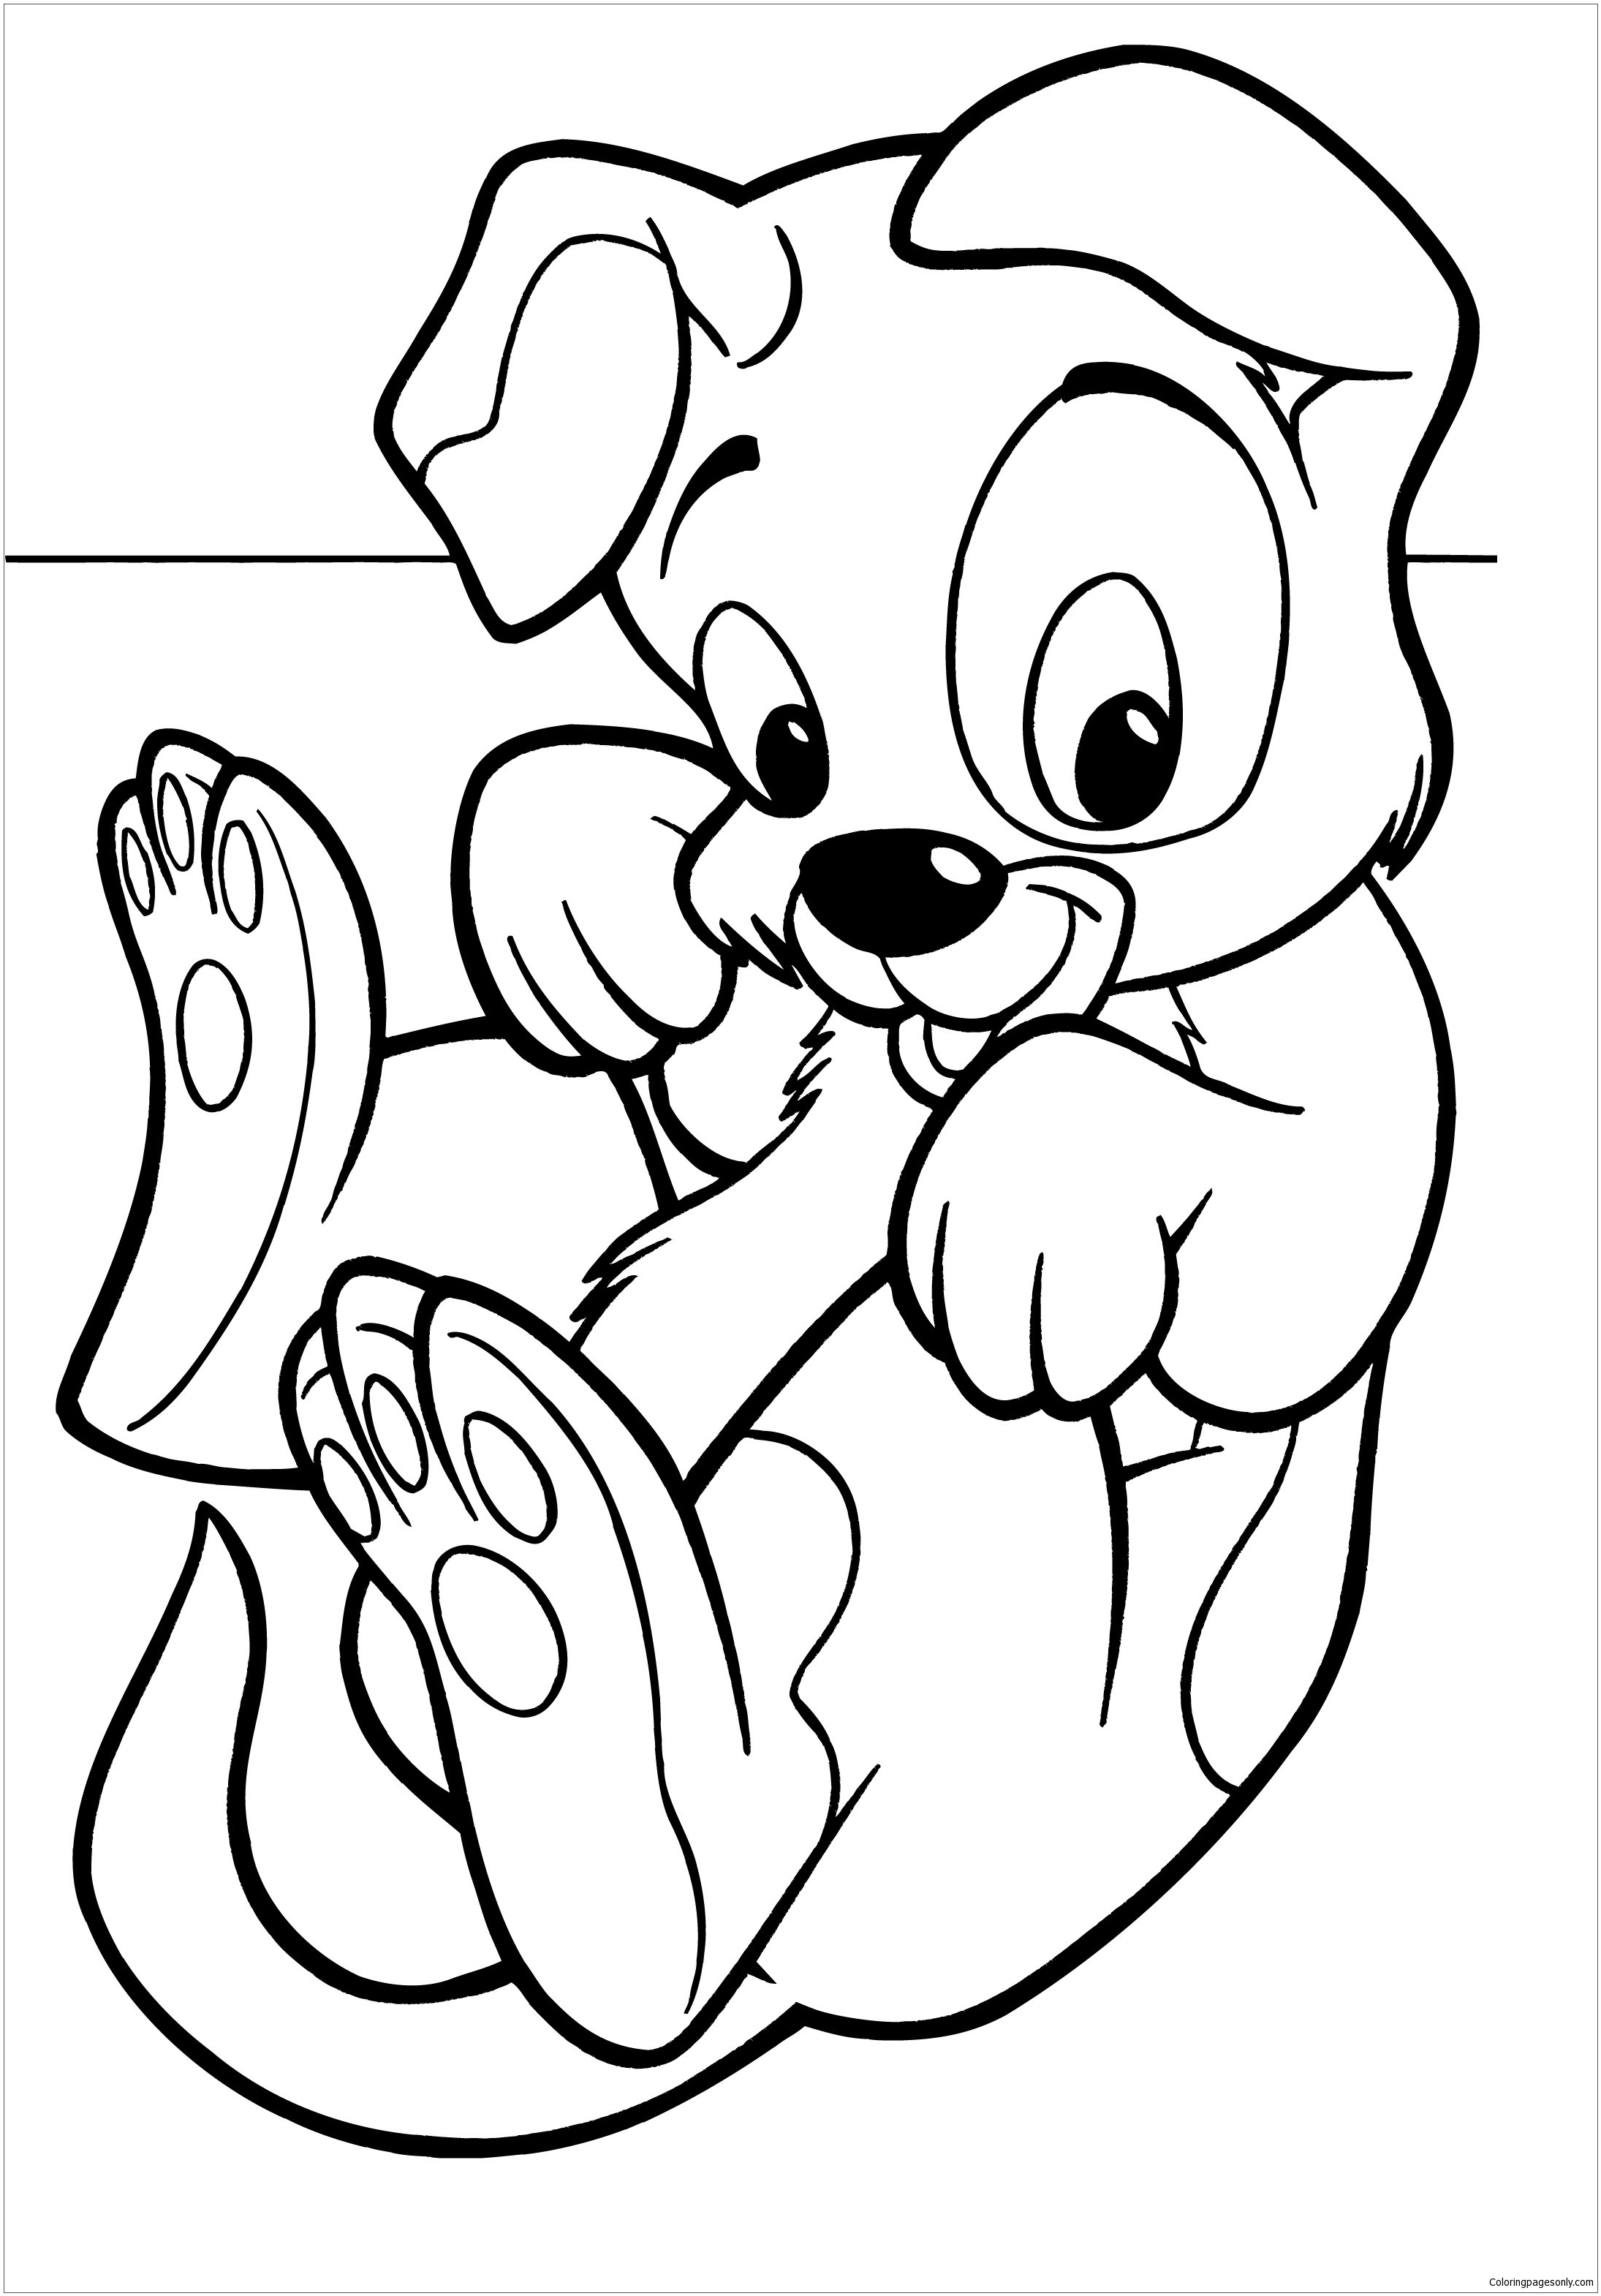 Puppy Cute 5 Coloring Pages